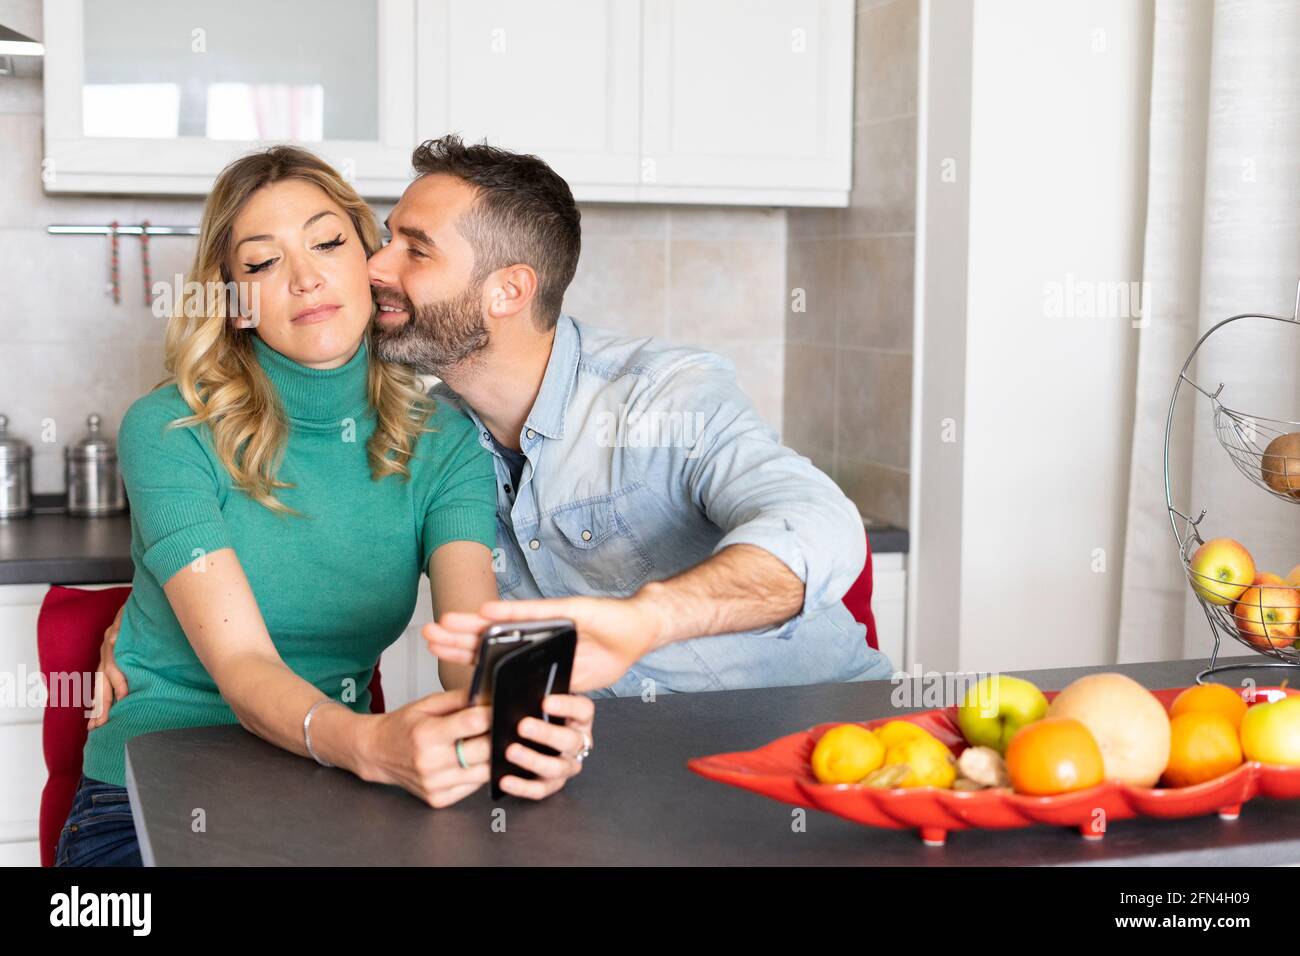 Boyfriend covers his girlfriend's phone camera while kissing her. Funny scene of a newlywed couple. Smartphone addiction and need for attention. Stock Photo